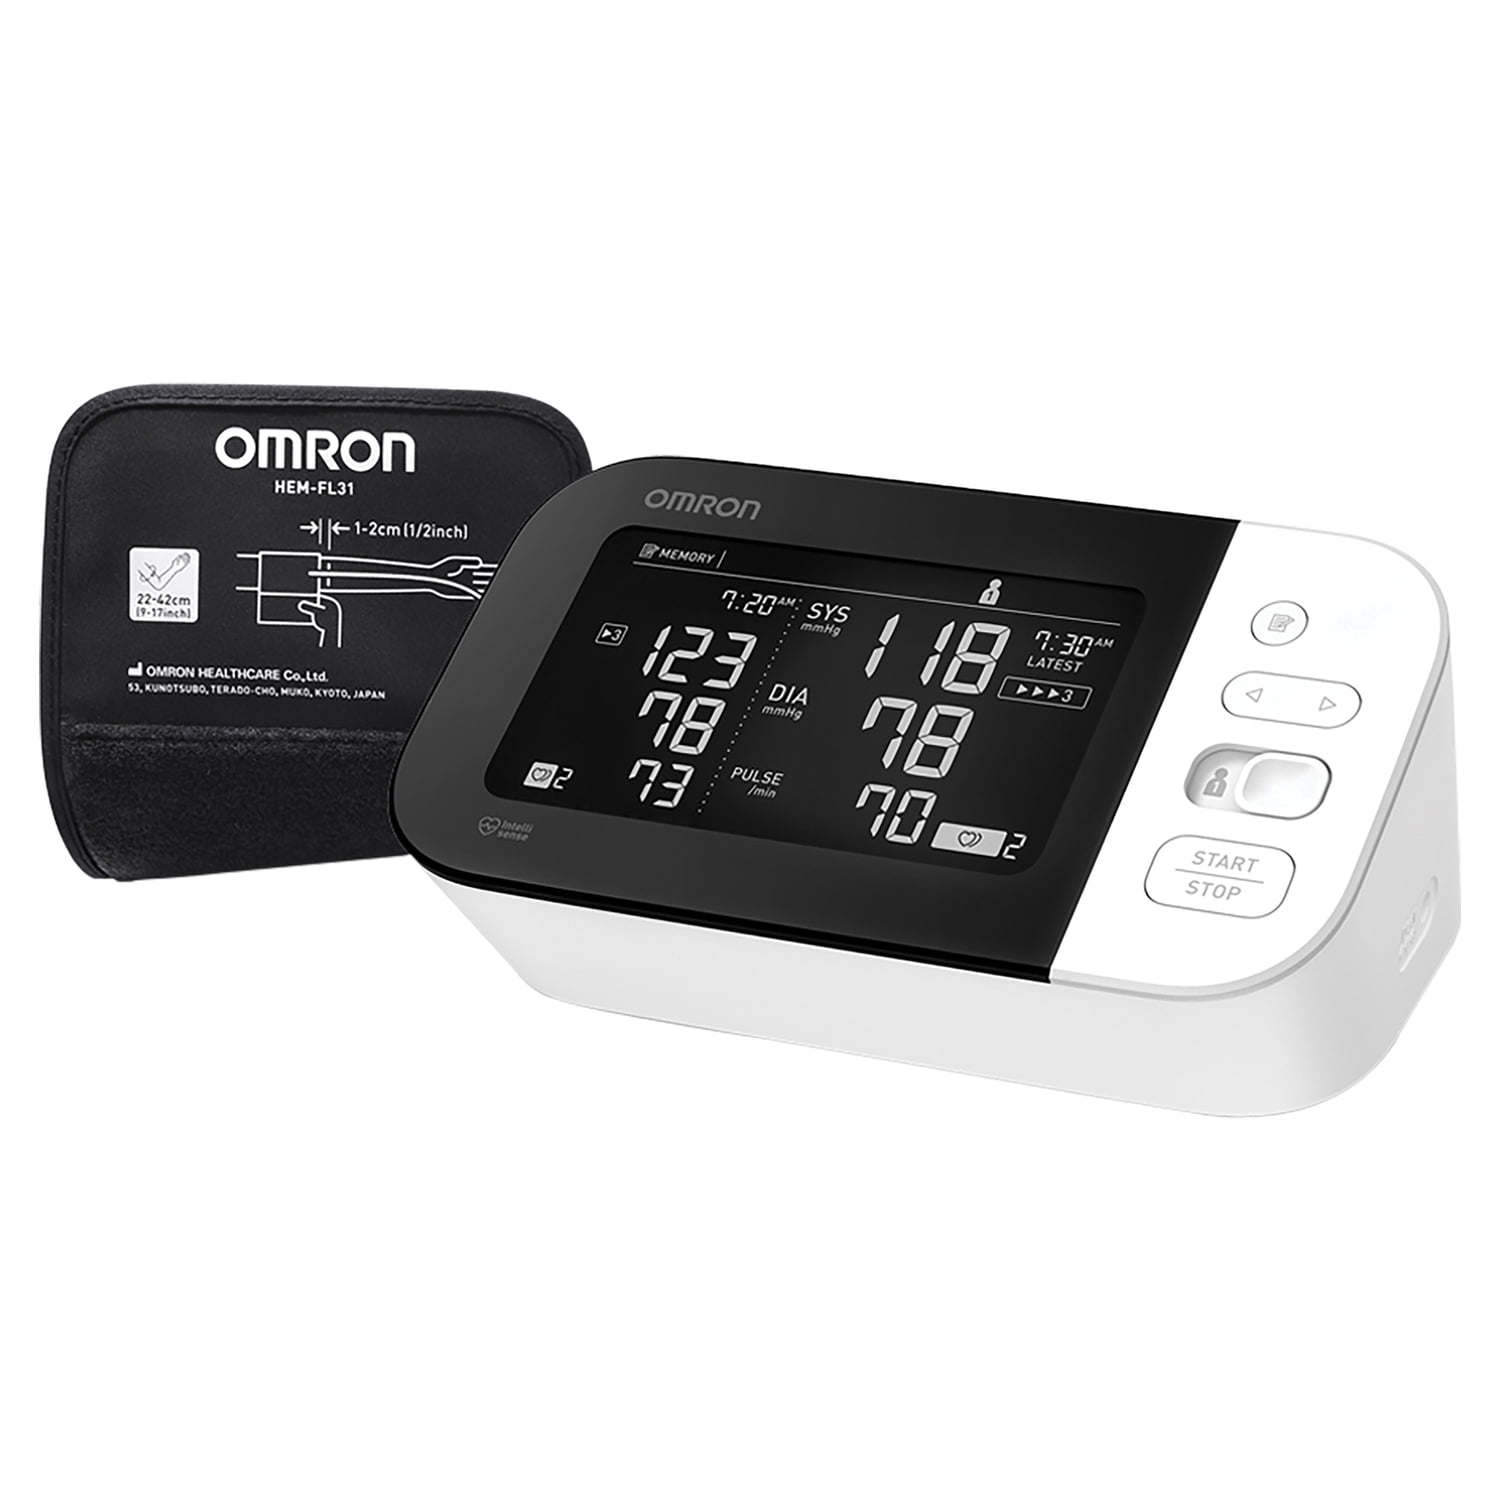  OMRON Platinum Blood Pressure Monitor, Upper Arm Cuff, Digital  Bluetooth Blood Pressure Machine, Stores Up To 200 Readings for Two Users  (100 each) : Health & Household